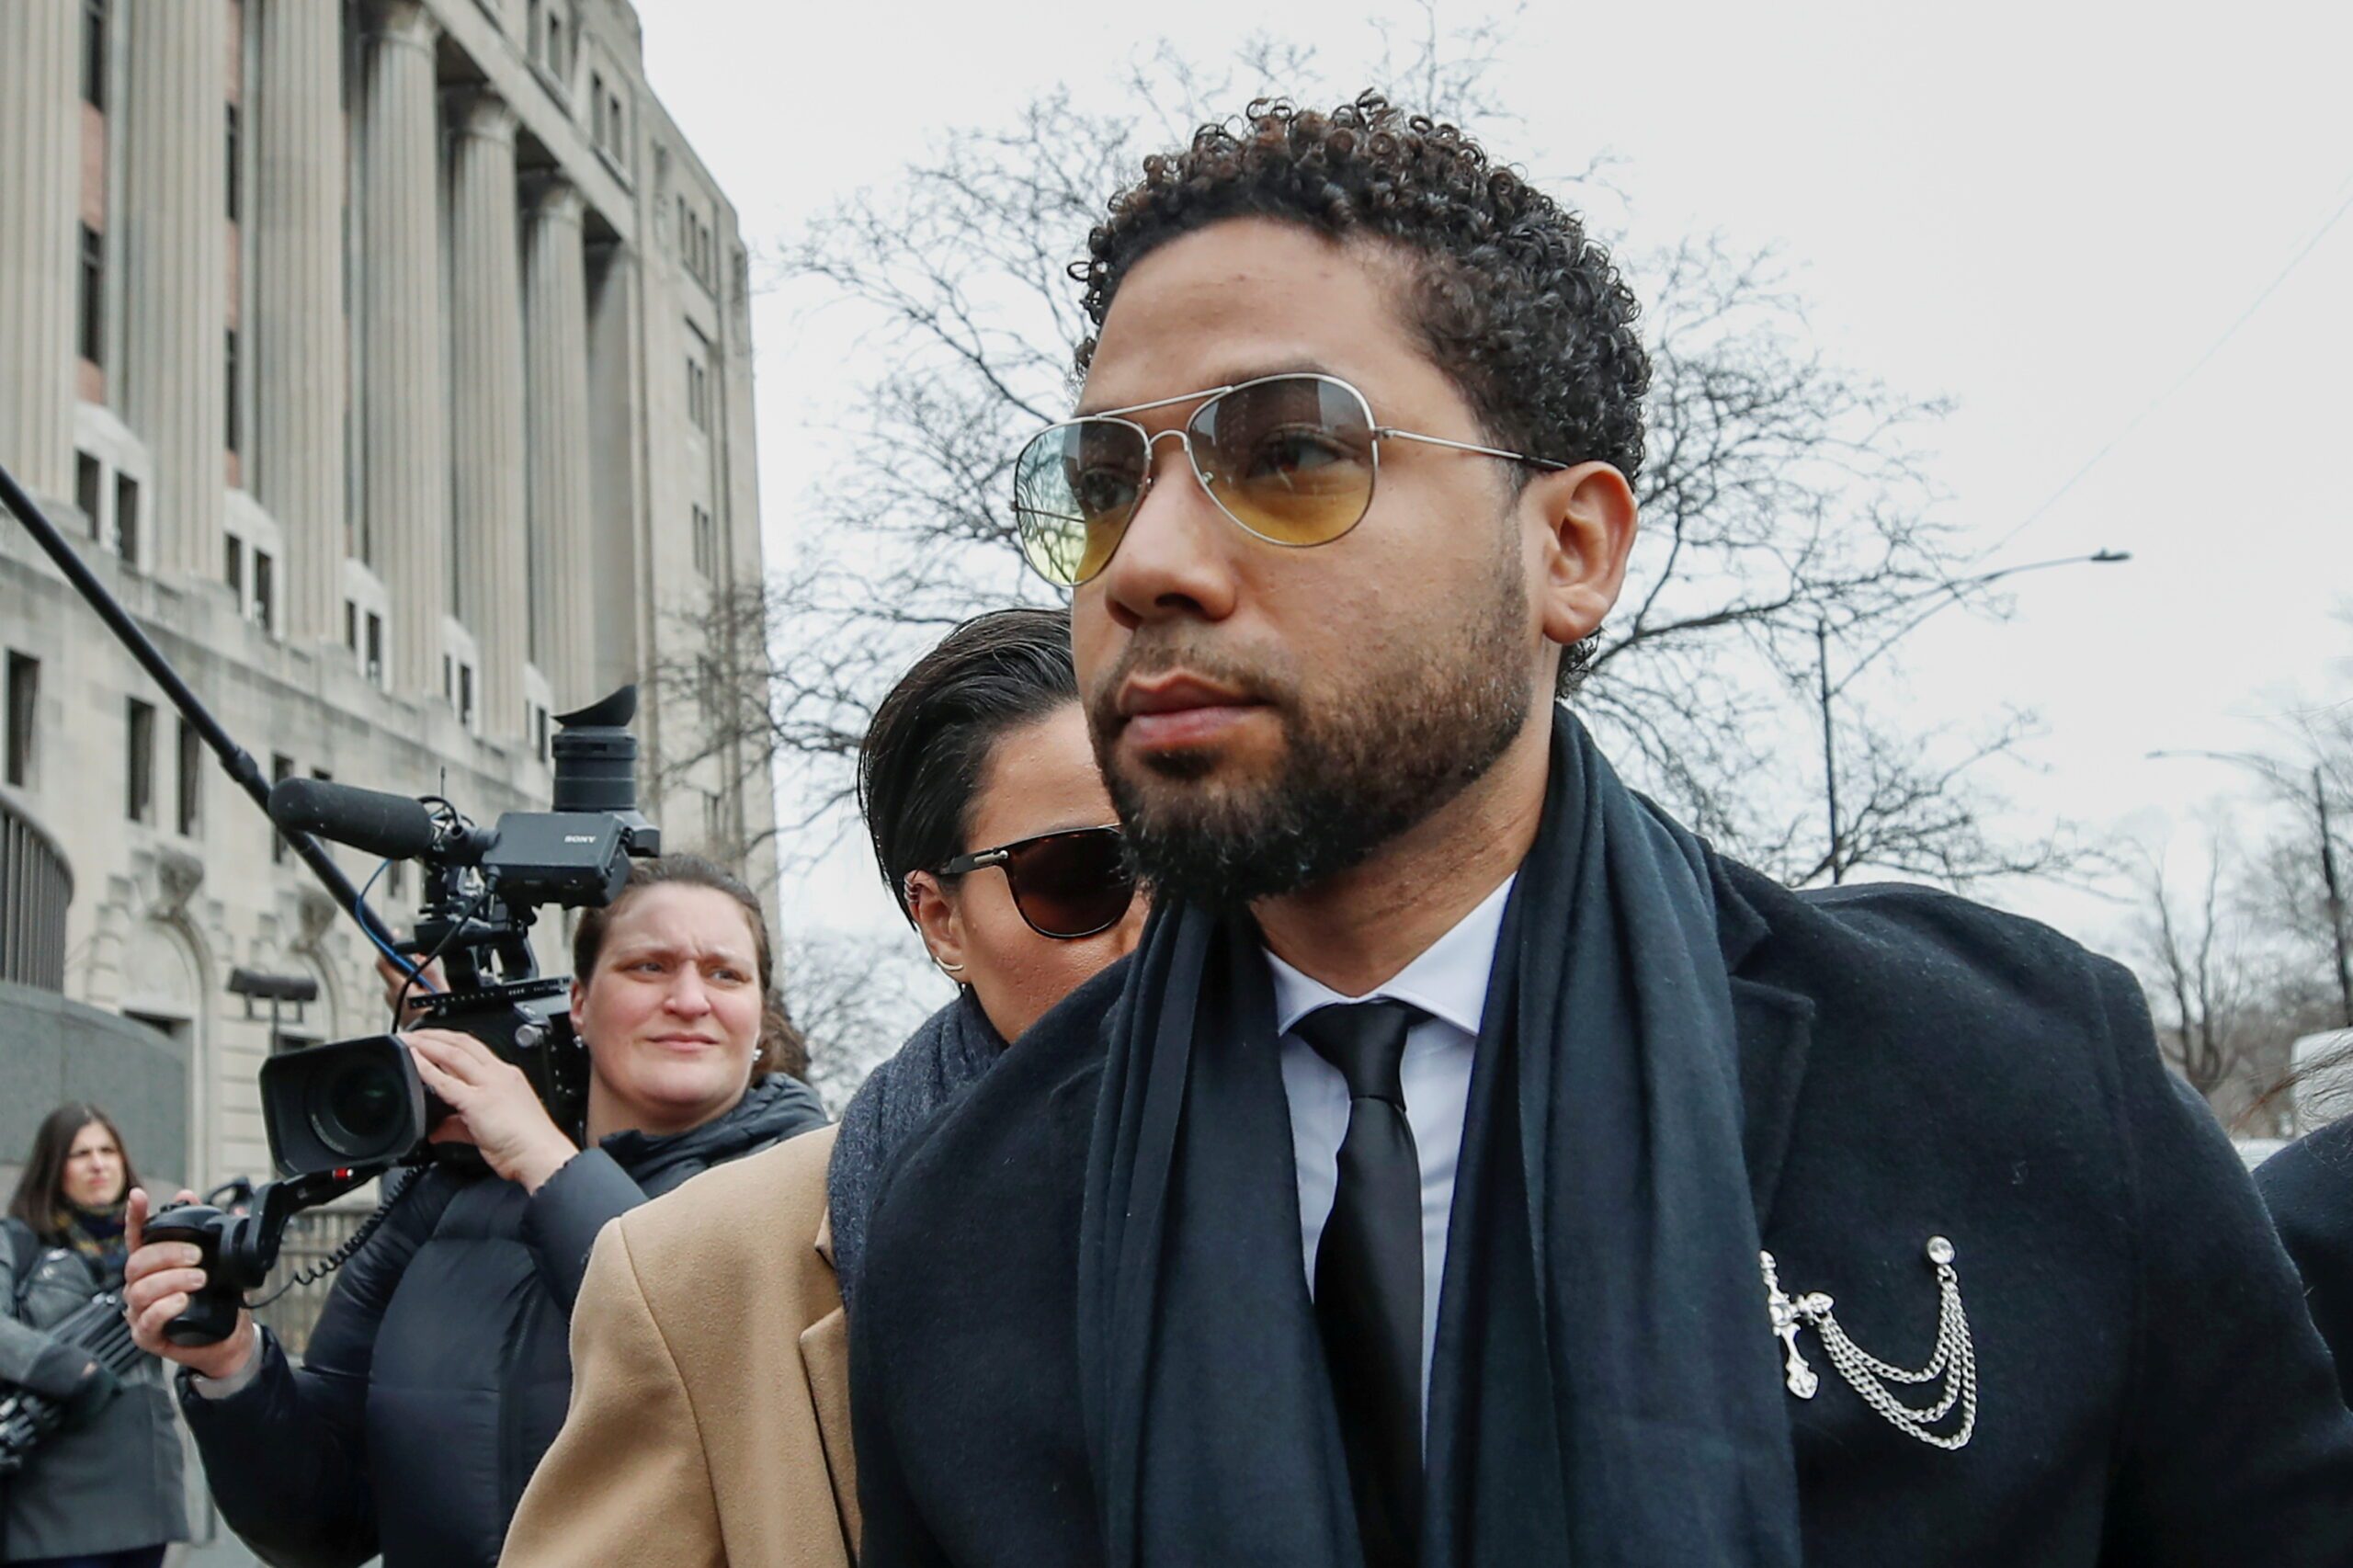 Hate crime or publicity stunt? Jussie Smollett case headed to trial